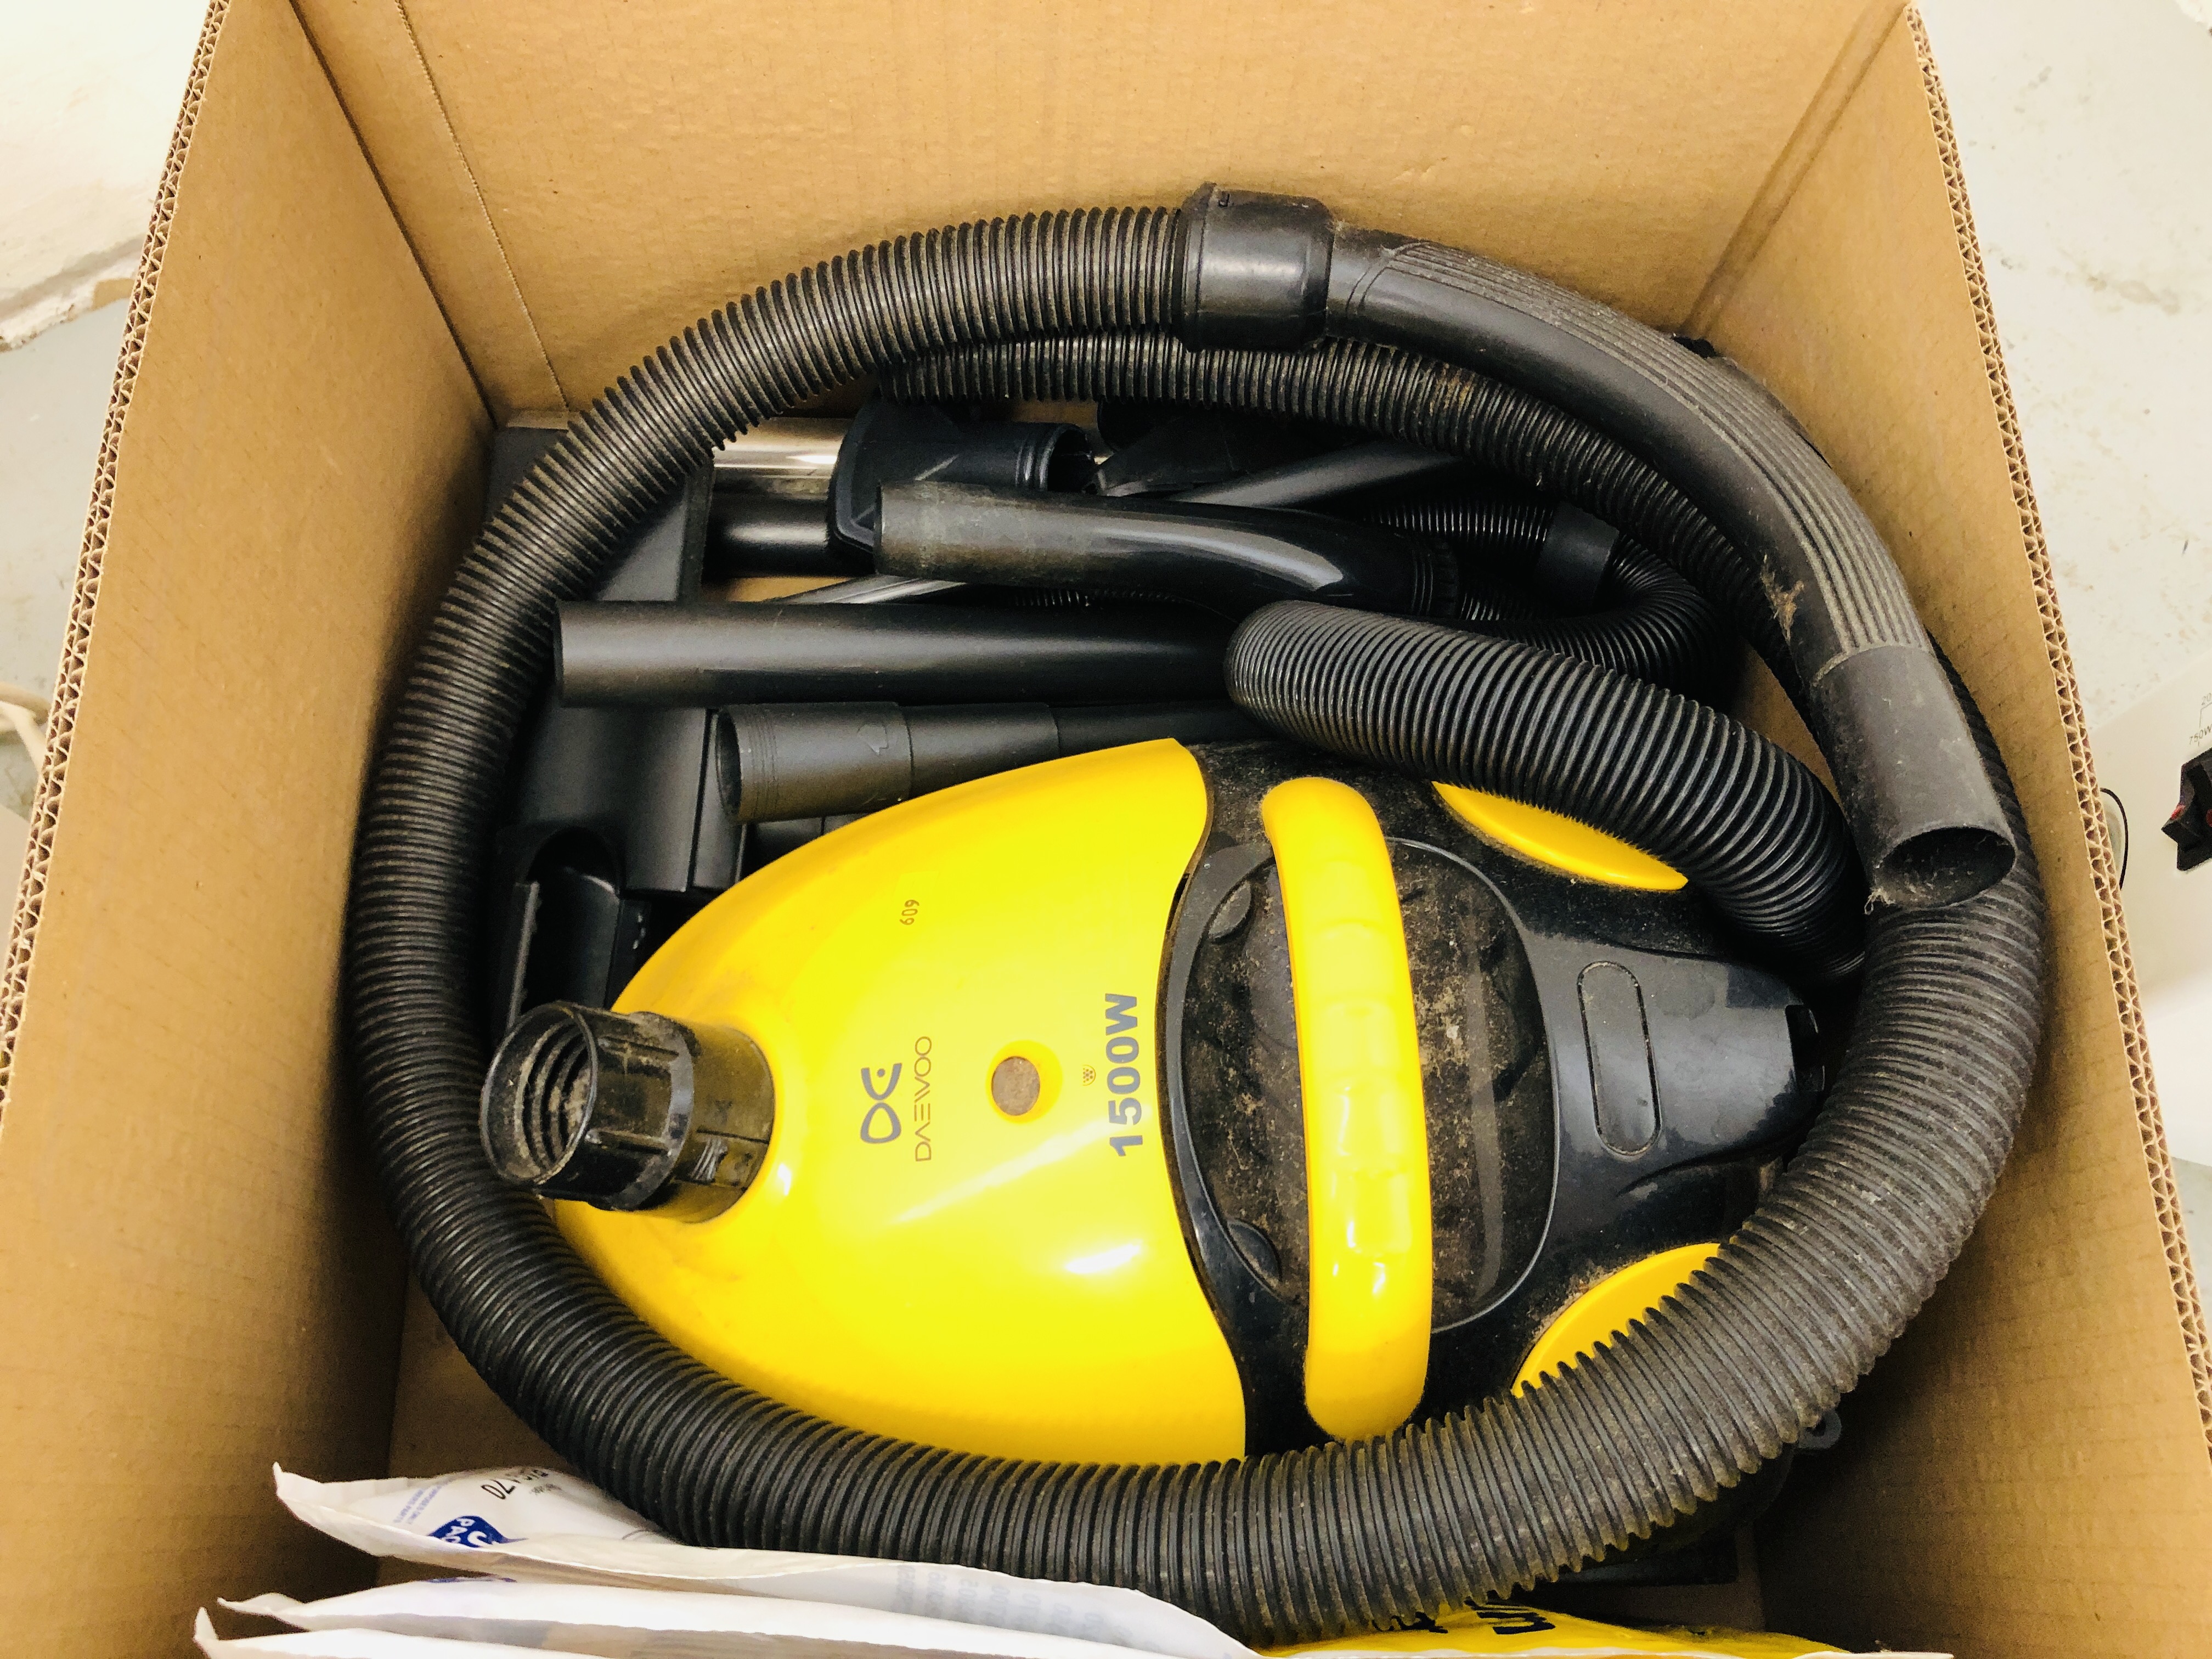 HOME ELECTRICALS AS CLEARED TO INCLUDE DAEWOO VACUUM CLEANER & ACCESSORIES, - Image 3 of 5